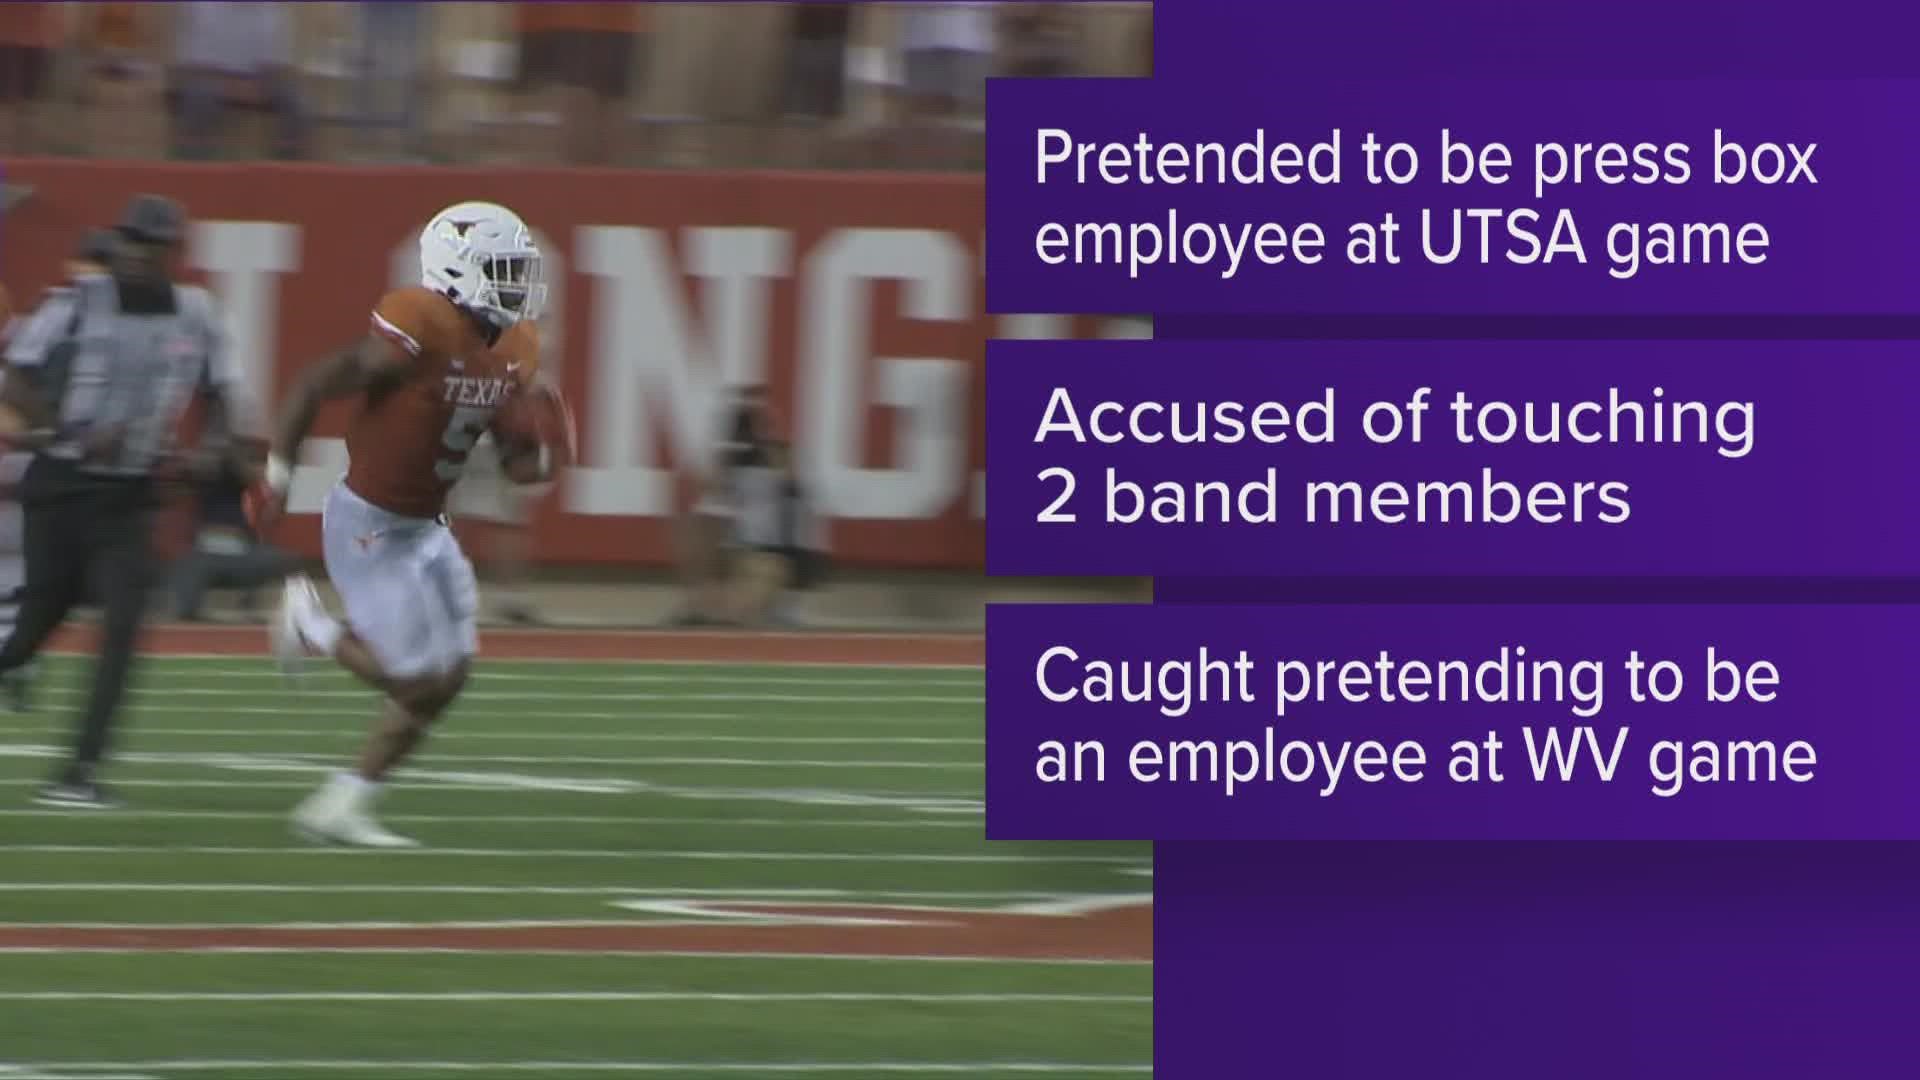 A man is in the Travis County Jail, accused of trespassing at DKR Memorial Stadium and inappropriately touching Texas band members.